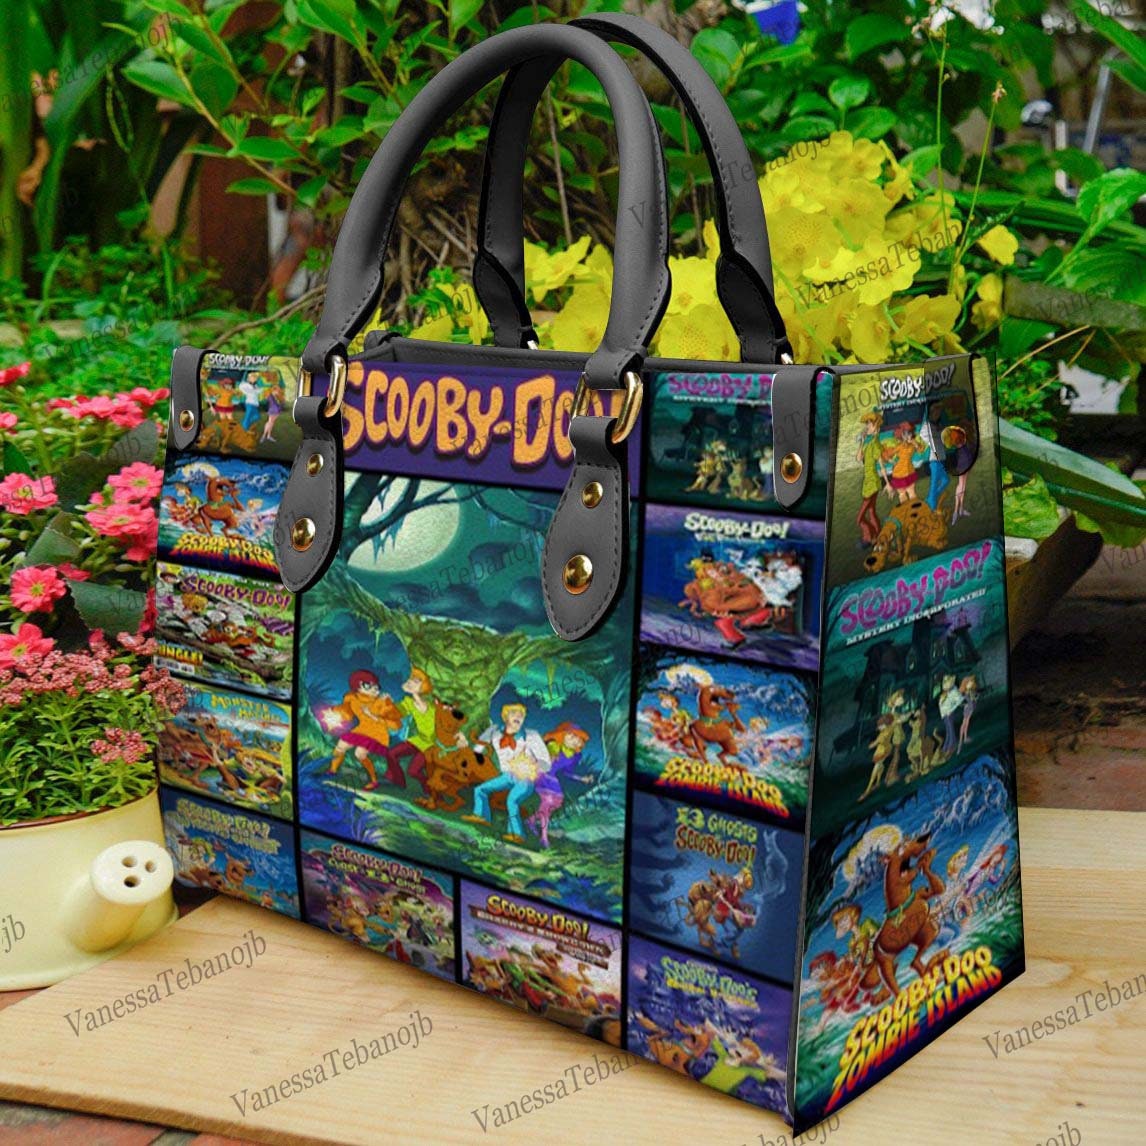 Scooby Doo Leather Bag